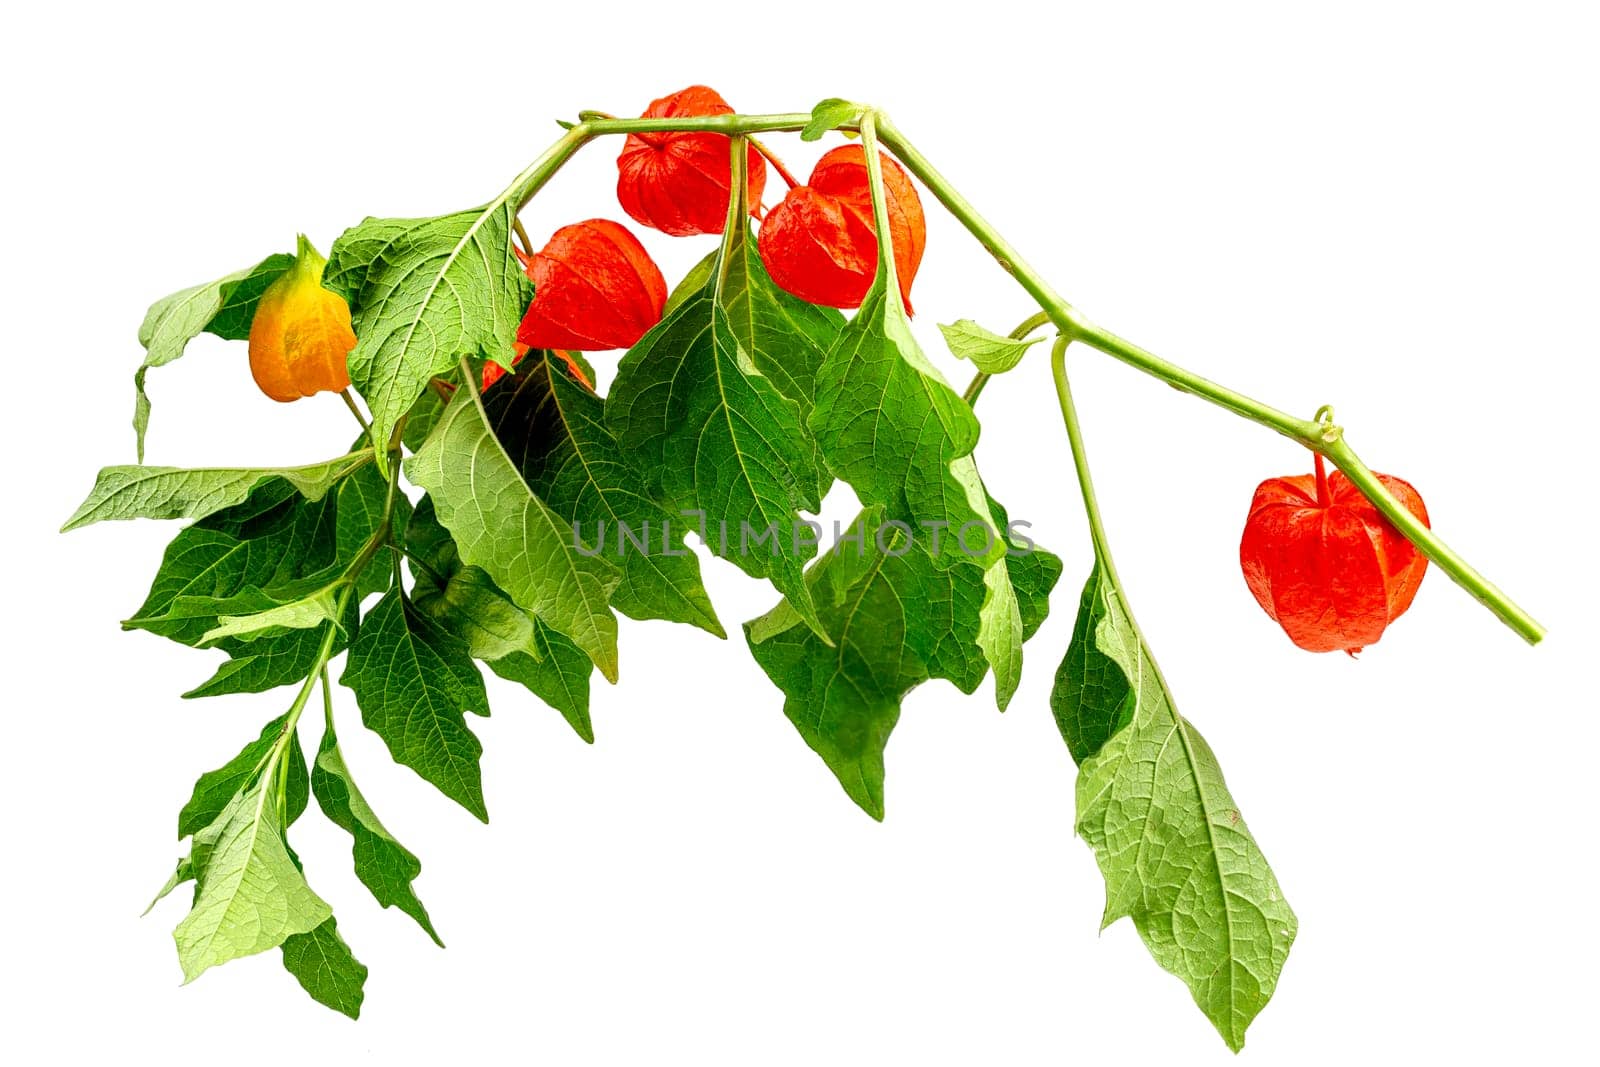 Red physalis alkekengi close-up. Eon wite backgroud. Chinese lantern, Japanese lantern, ground berry. . Medical plant for treatment of various diseases. by JPC-PROD